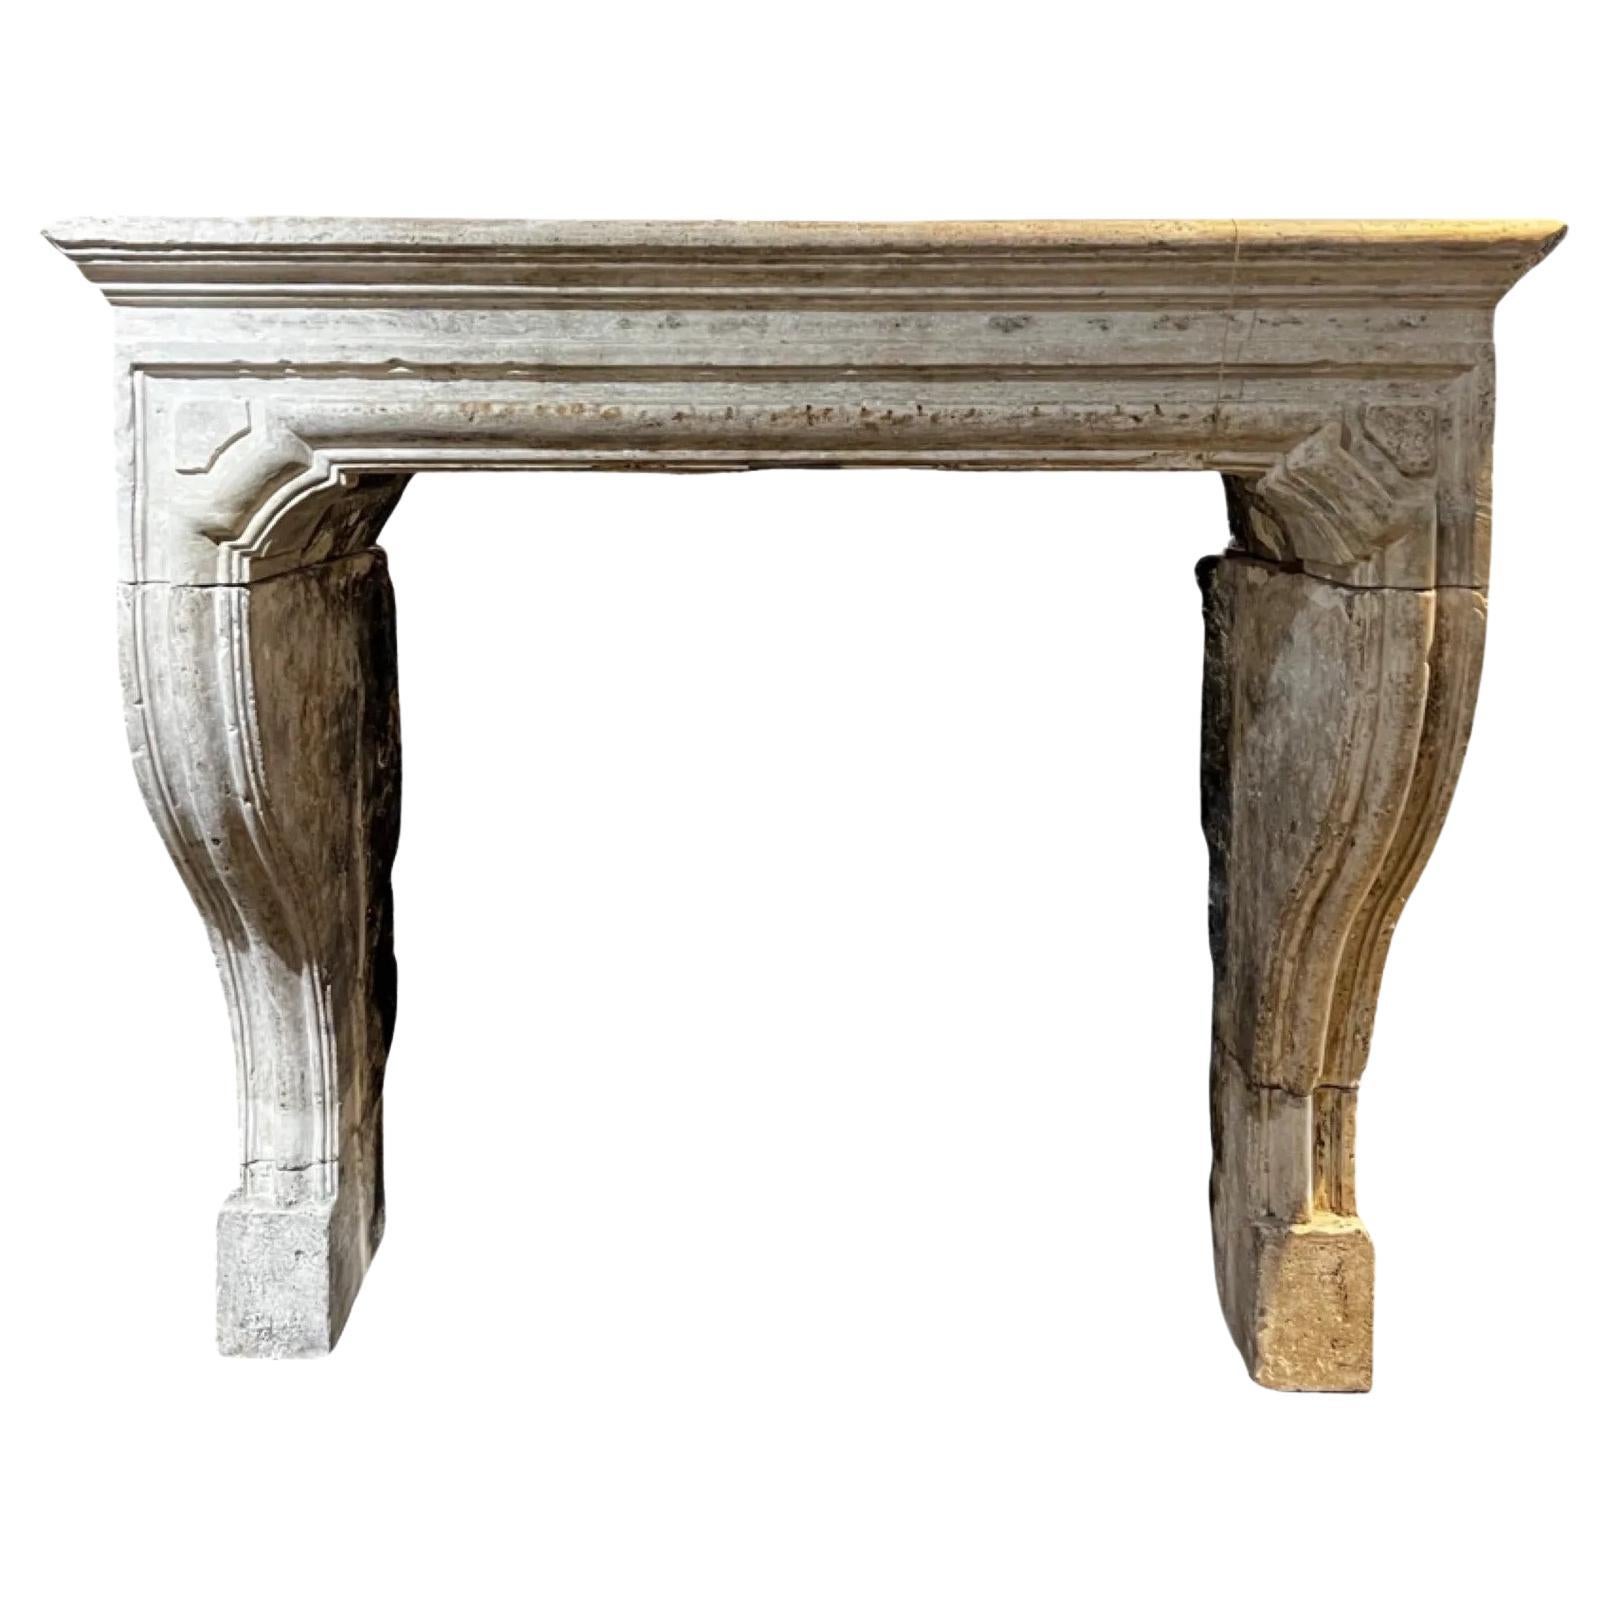 French Limestone Mantel For Sale at 1stDibs